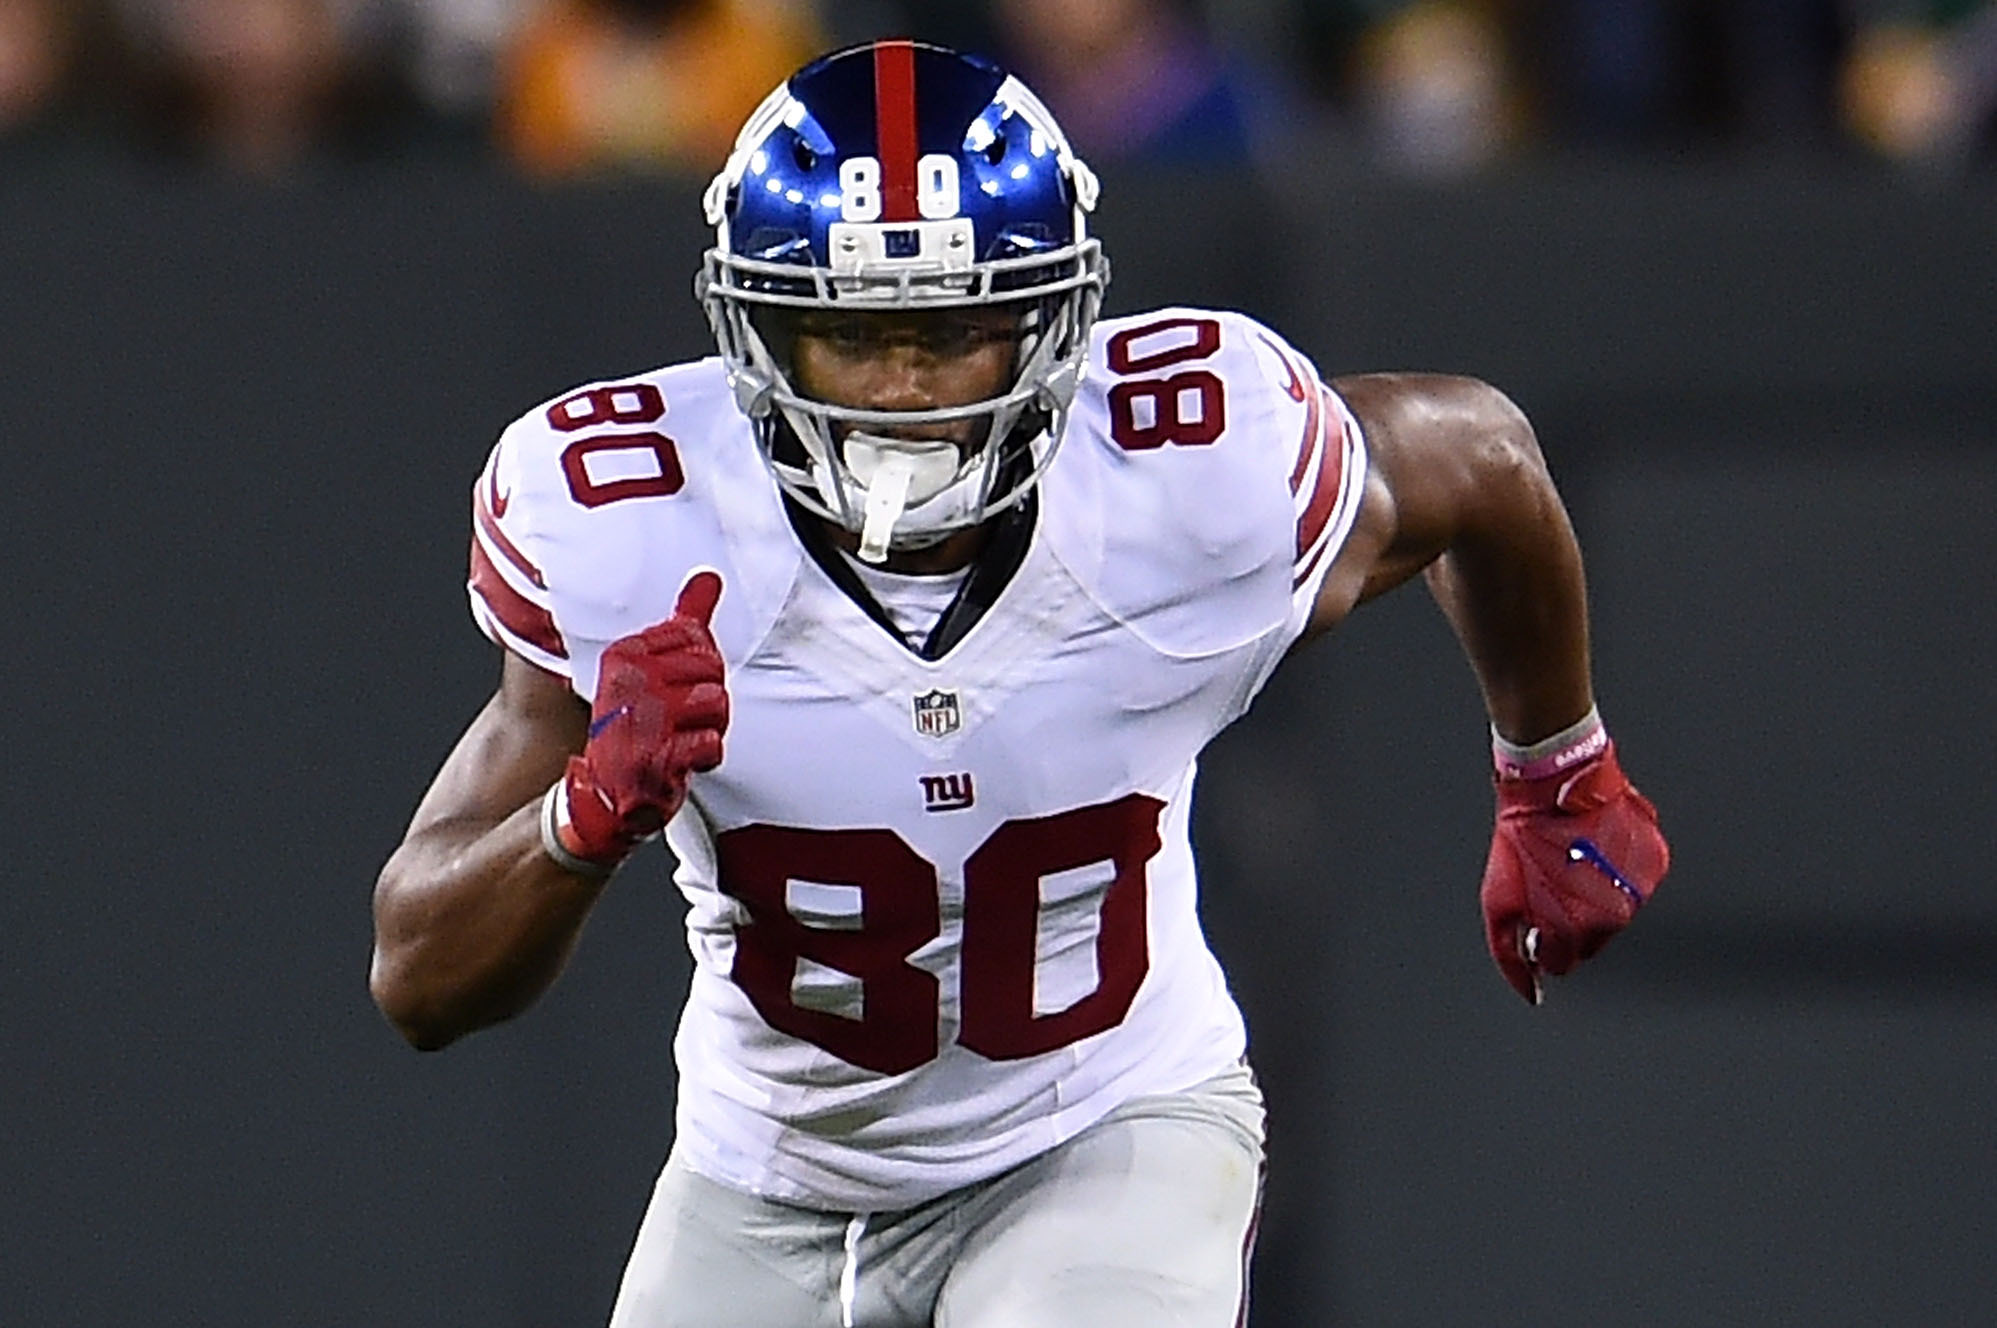 Victor Cruz chosen by 'GMFB' as one of NFL's greatest undrafted